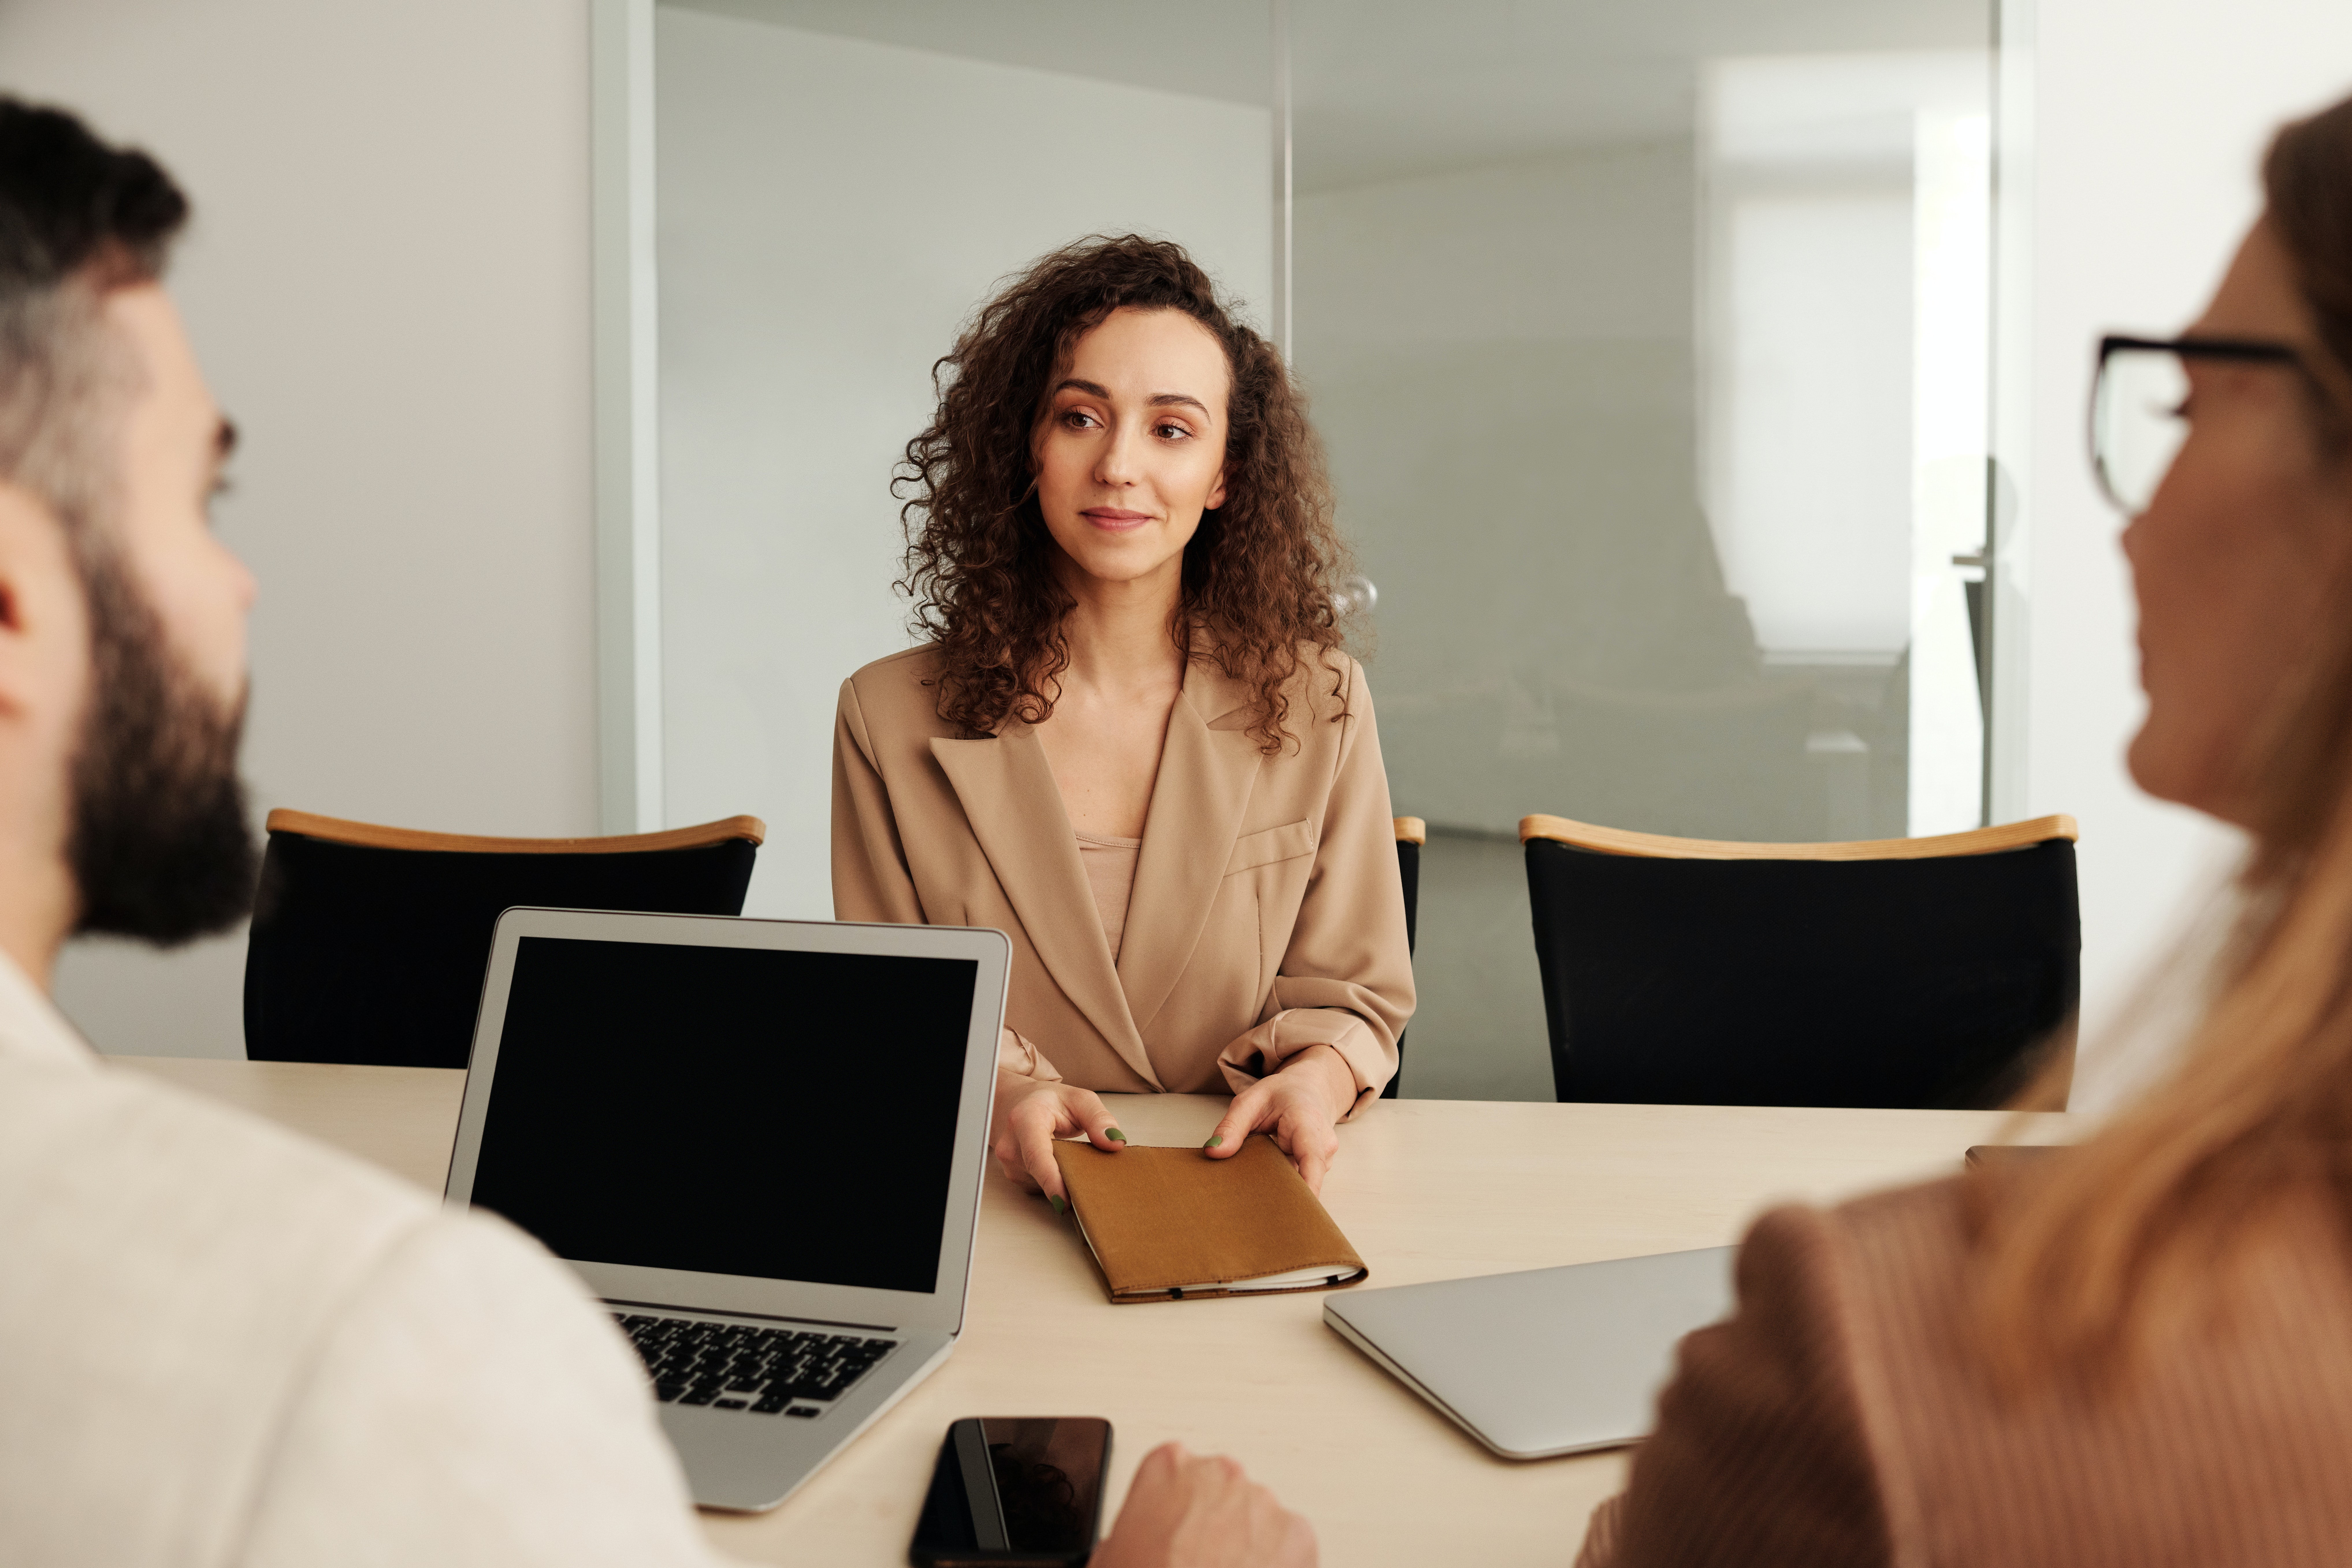 How to Conduct High Quality Interviews